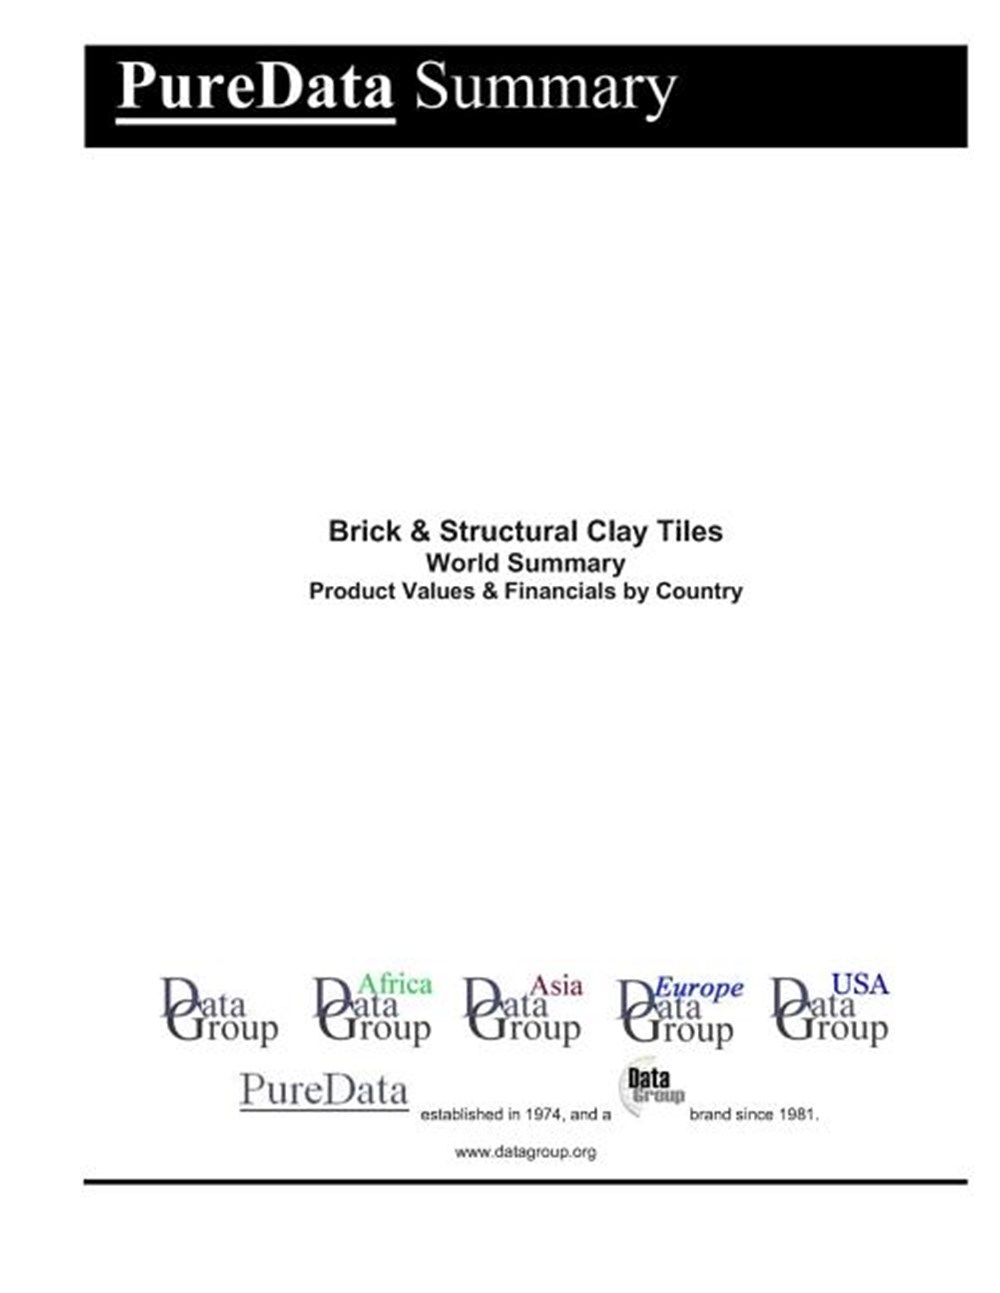 Brick & Structural Clay Tiles World Summary Product Values & Financials by Country